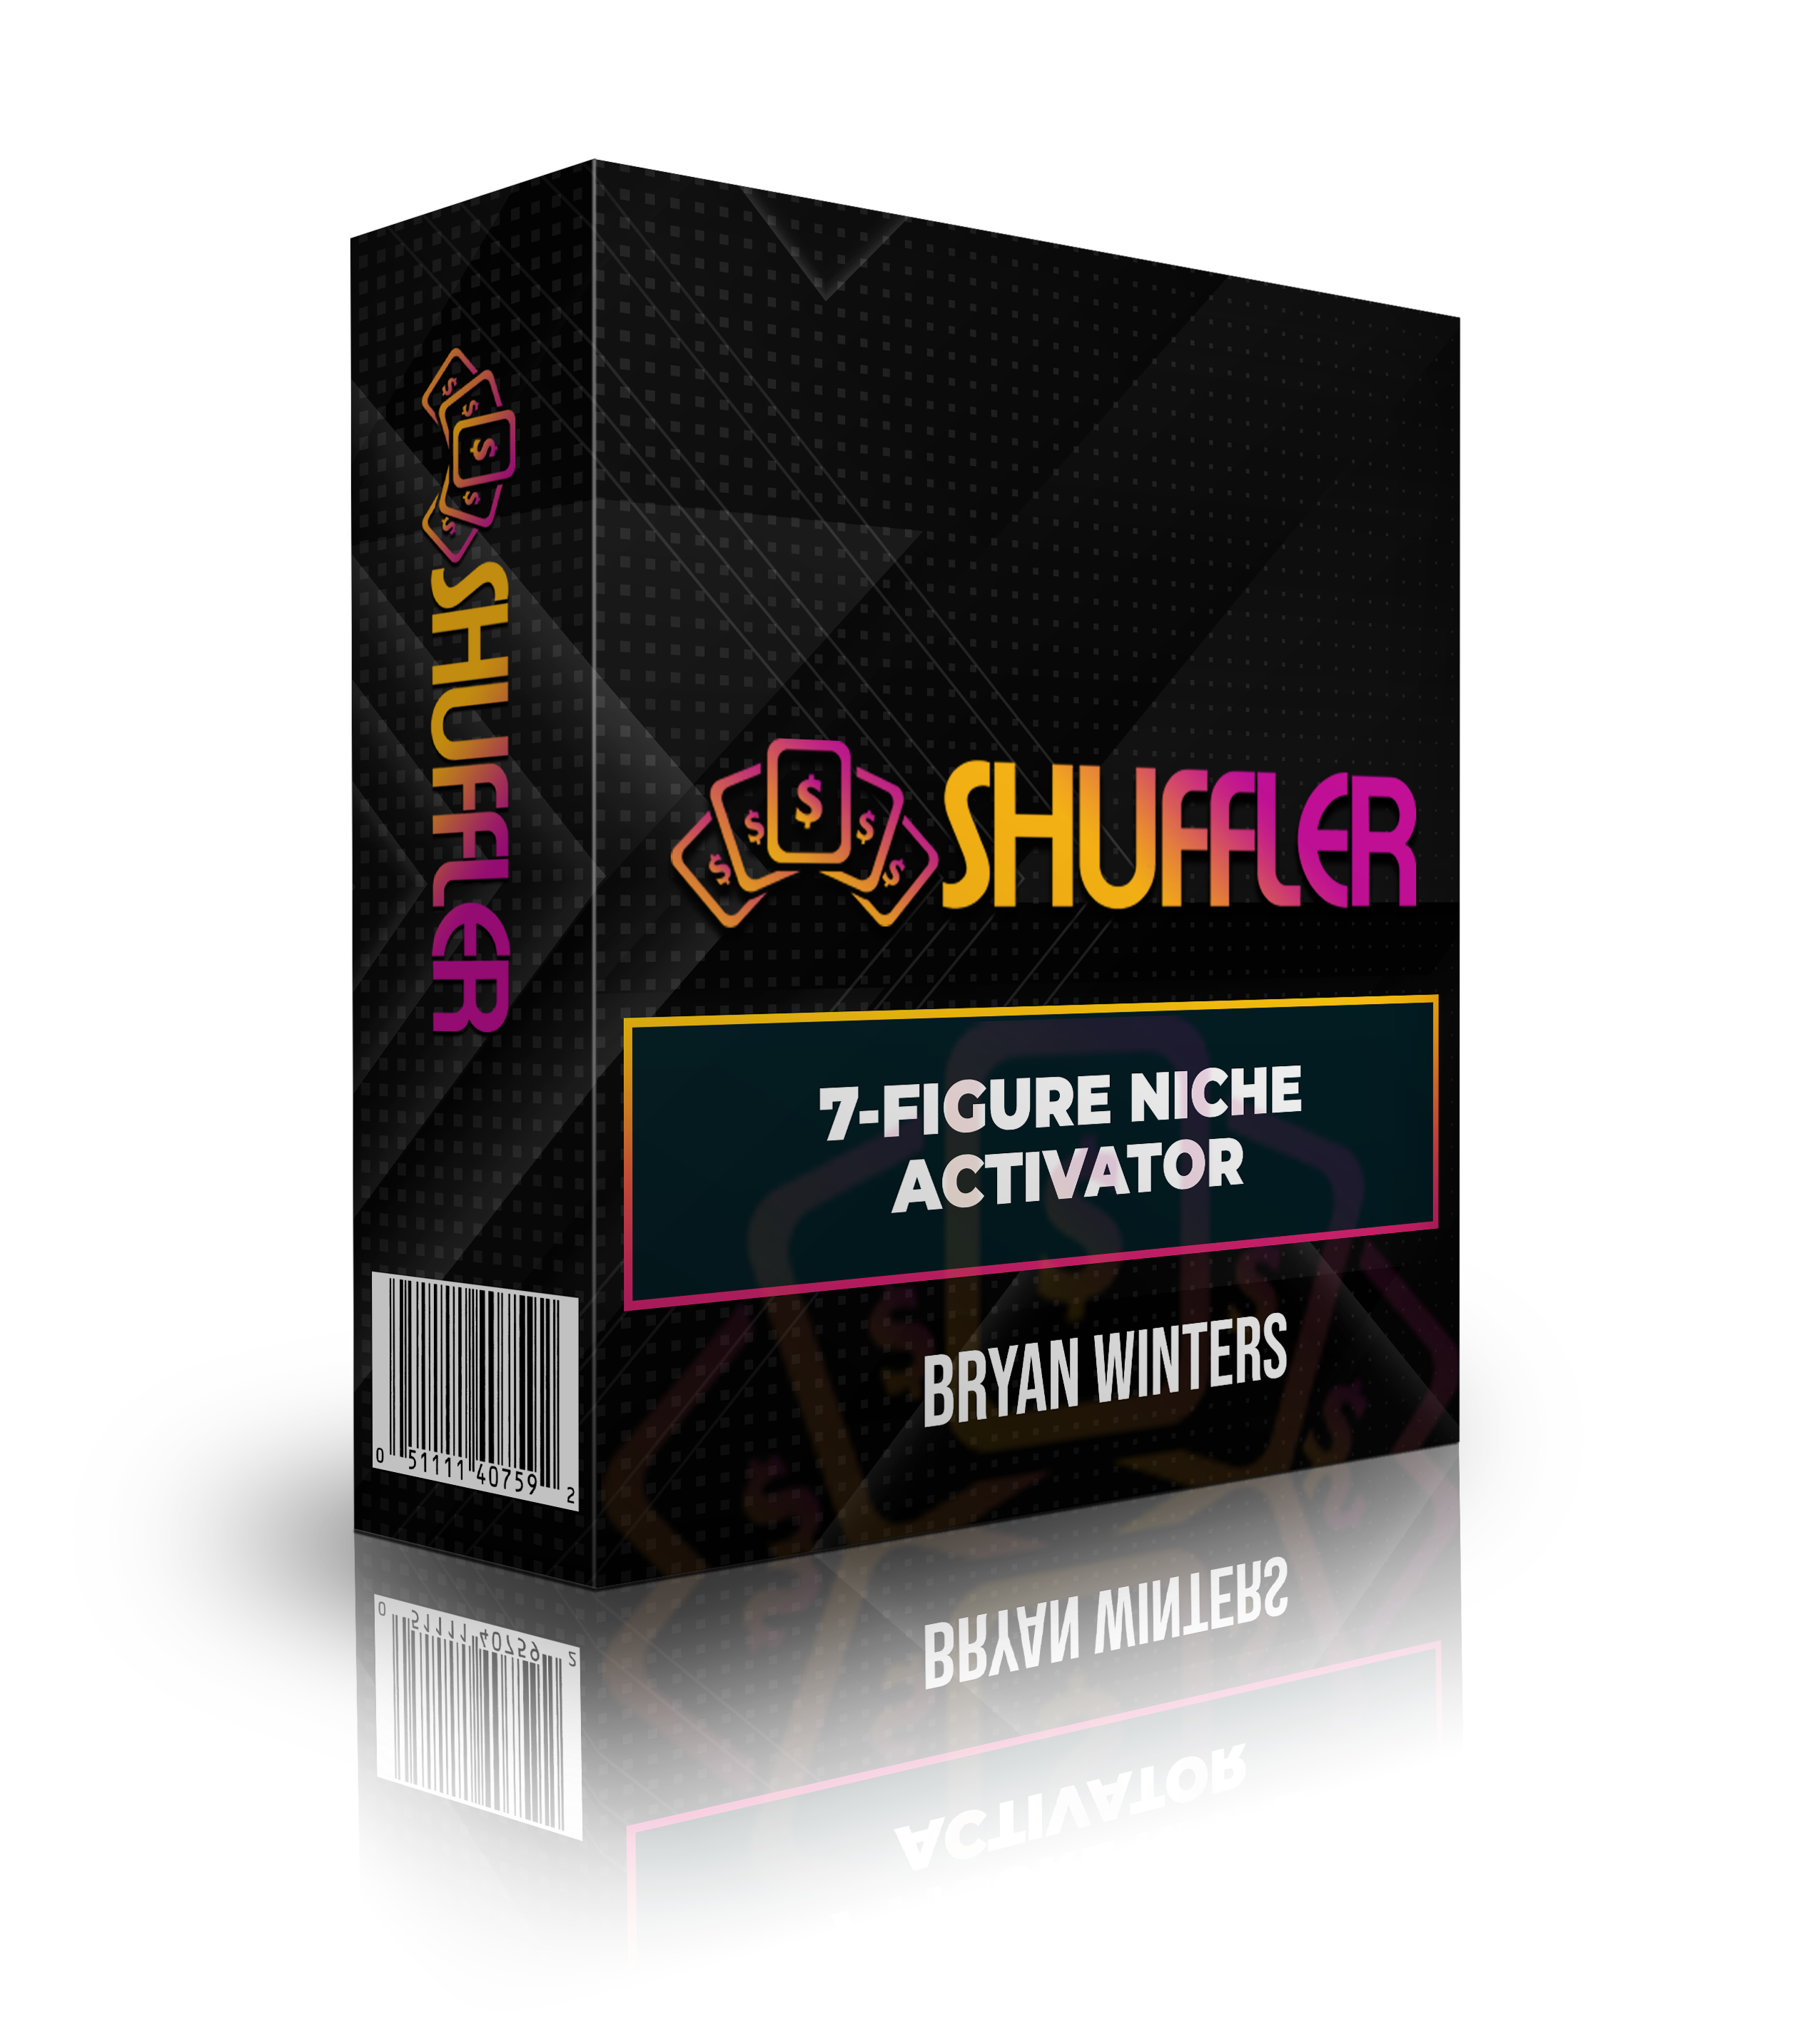 OTO 3 - SHUFFLER'S 7-FIGURE NICHE ACTIVATOR - $97 With $67 Downsell. SHUFFLER'S FE app generates Internet marketing and "make money online" related funnels only... Our "7-Figure Niche Activator" upgrade literally unlocks 20+ BILLION additional funnels, specifically in the multi-BILLION dollar self-help and health & fitness niches.